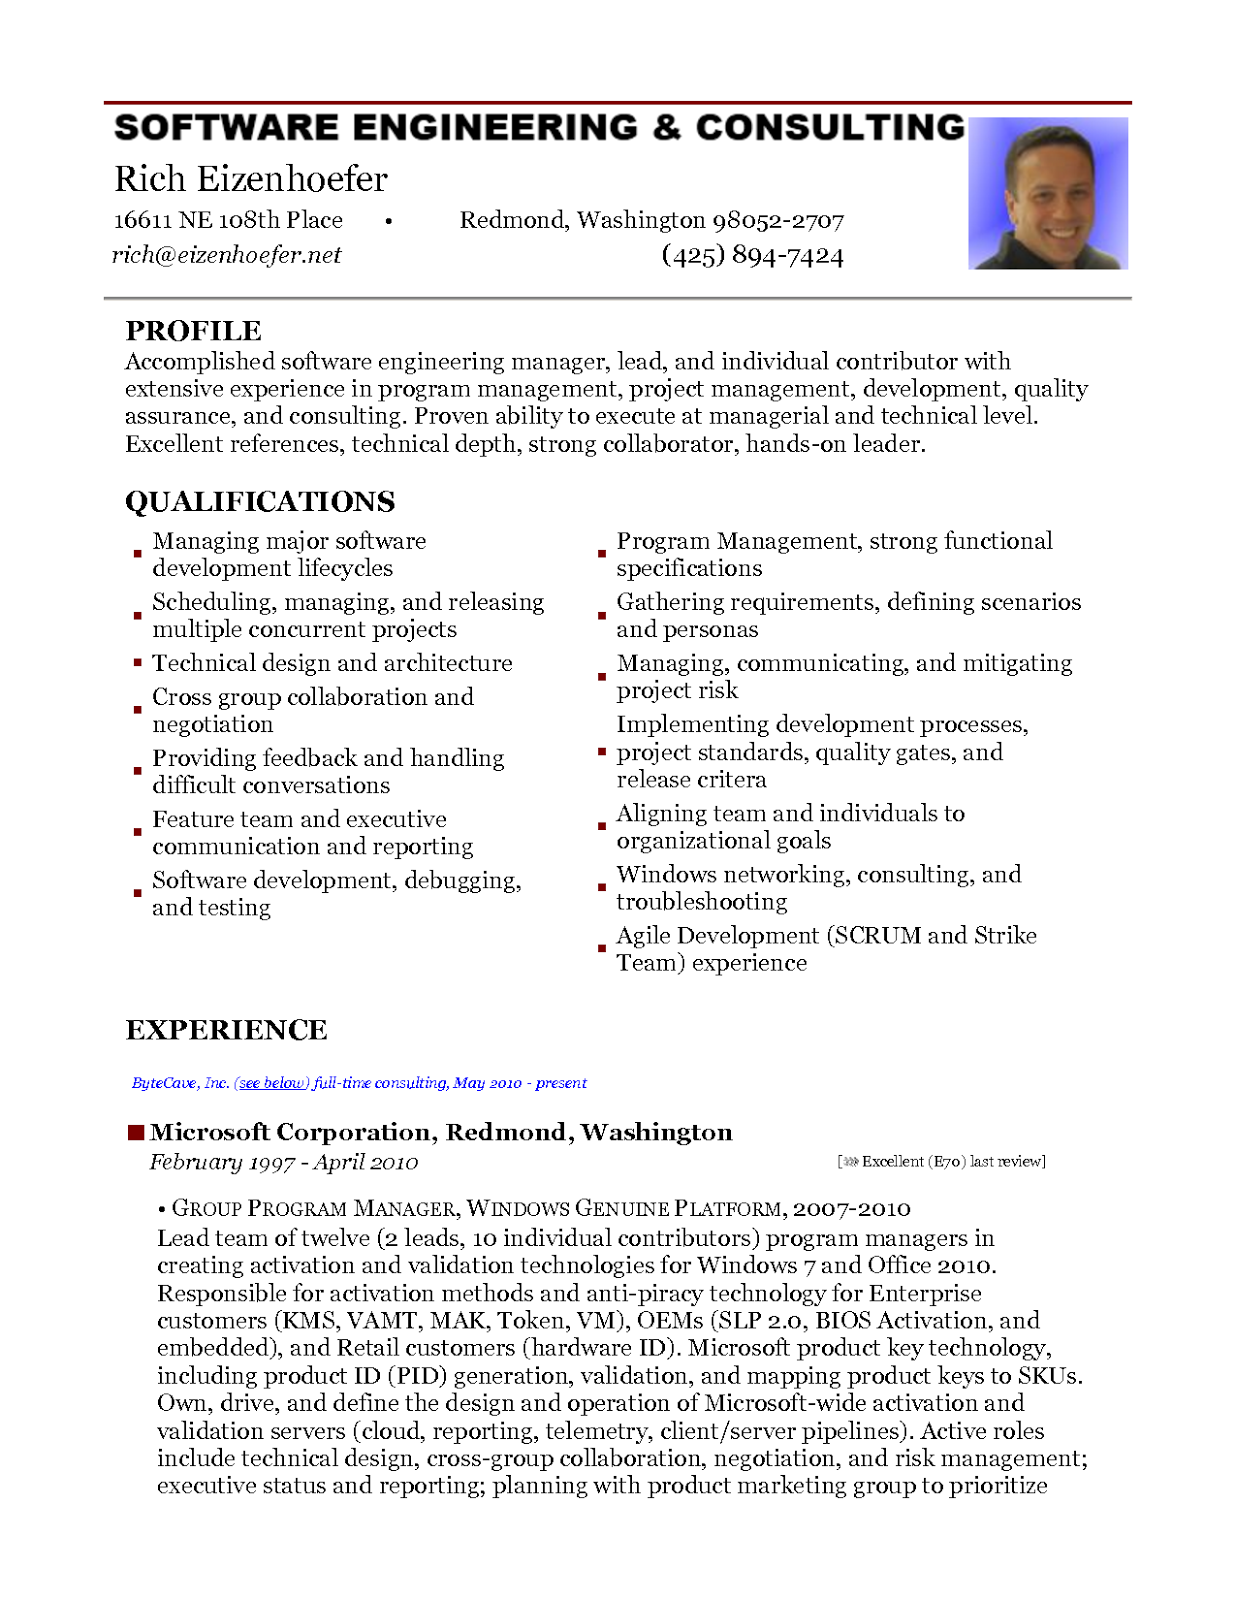 Resume for one year experienced software engineer